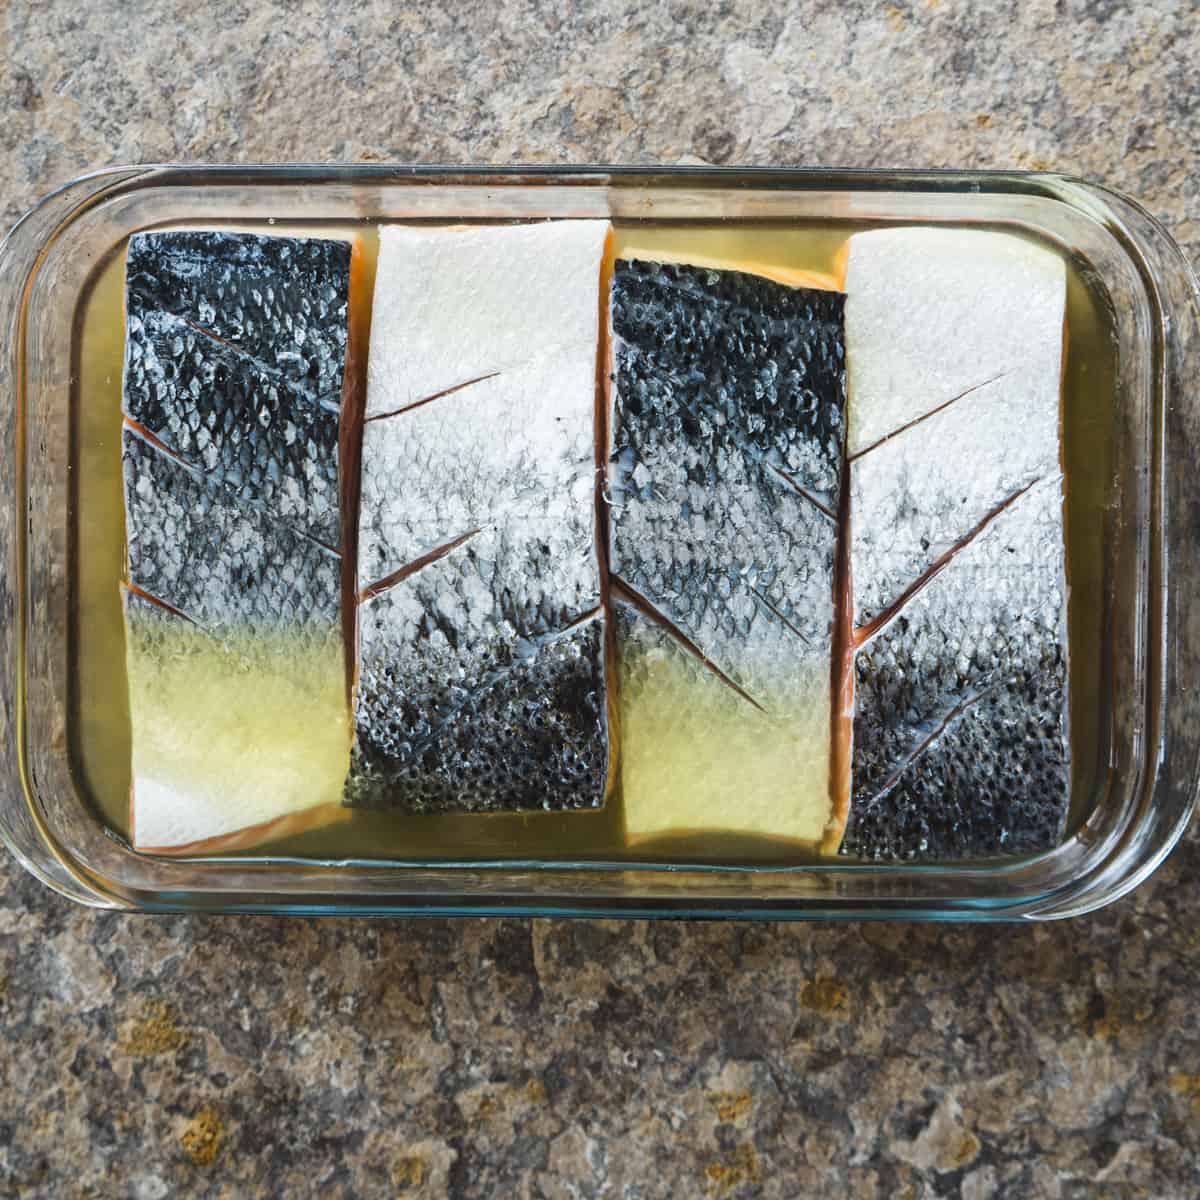 Salmon filets in pickle brine showing scores in the skin